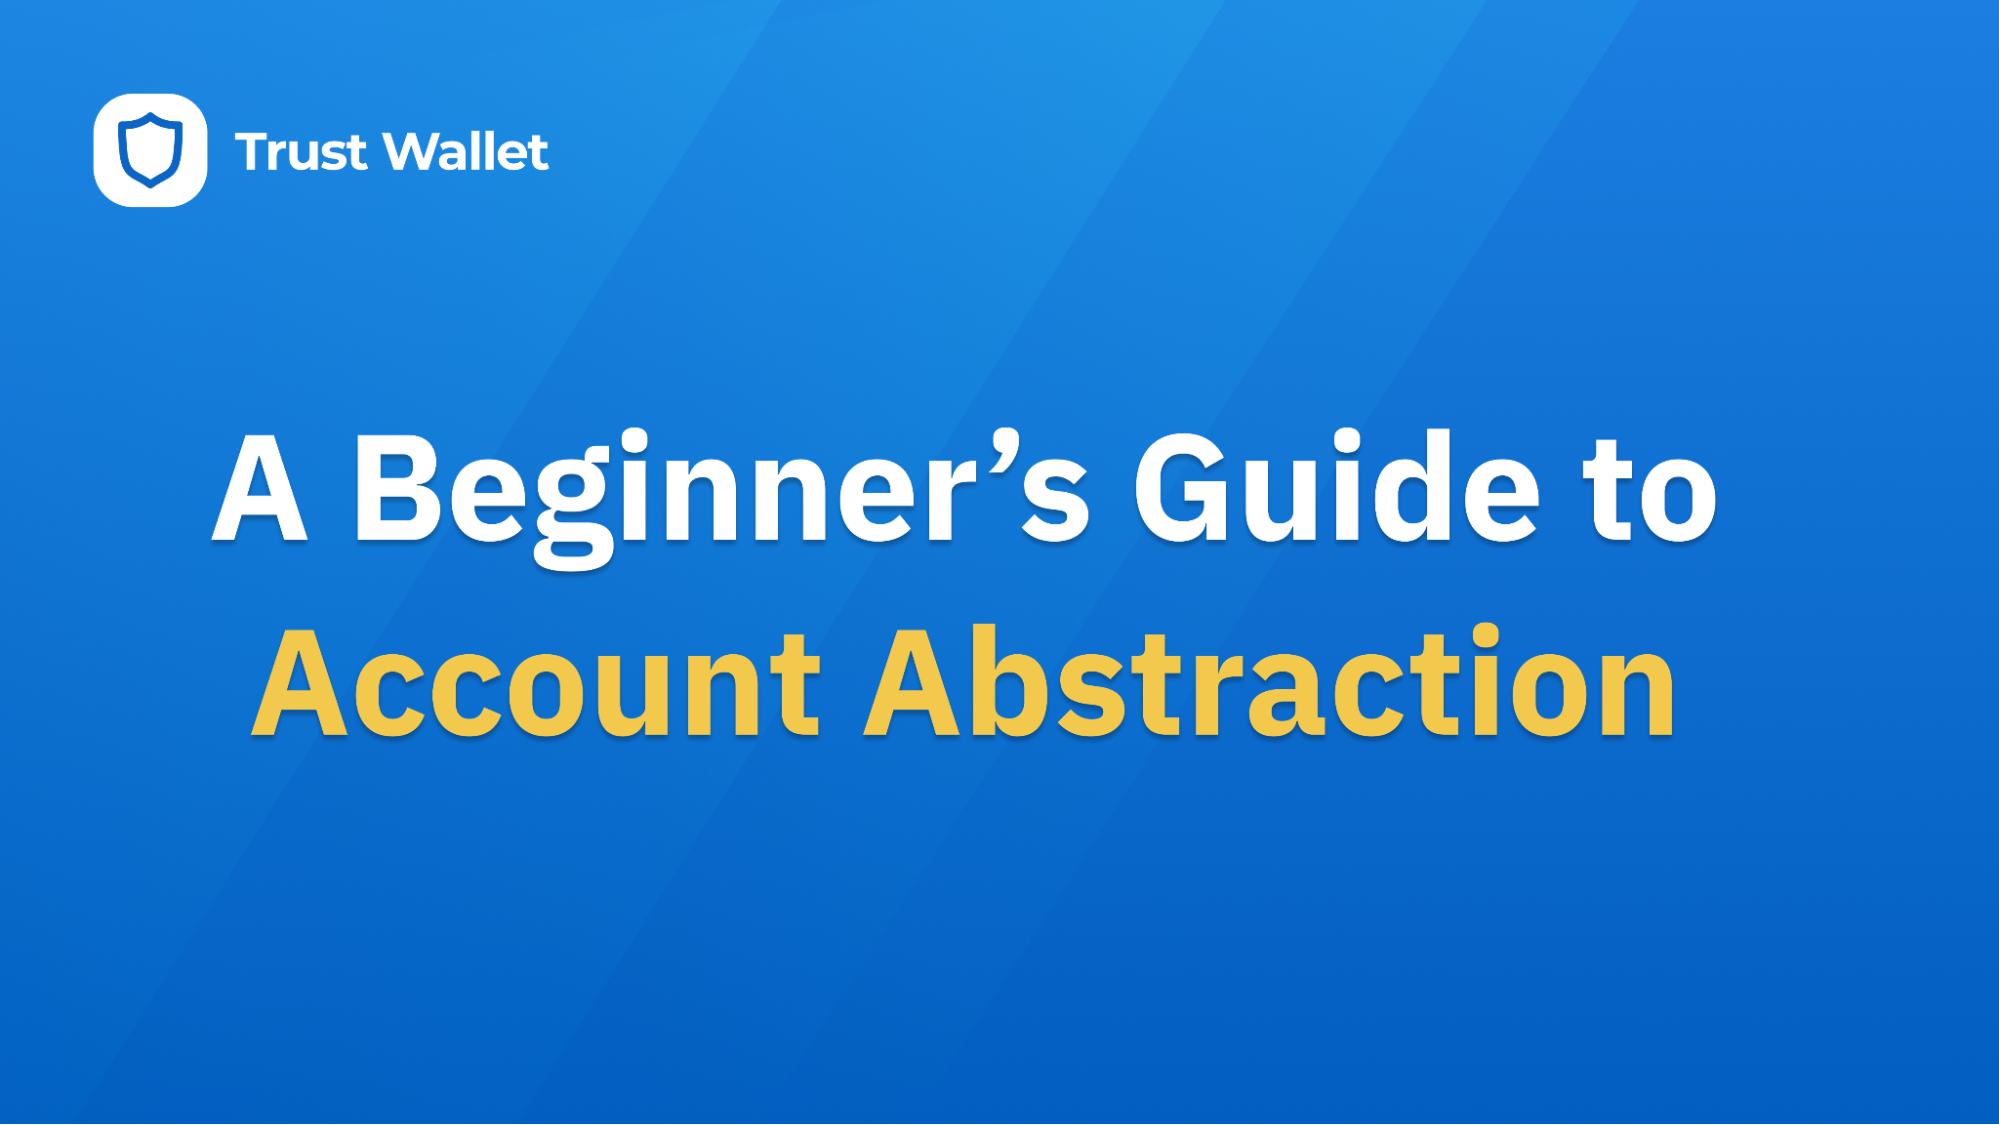 A Beginner’s Guide to Account Abstraction